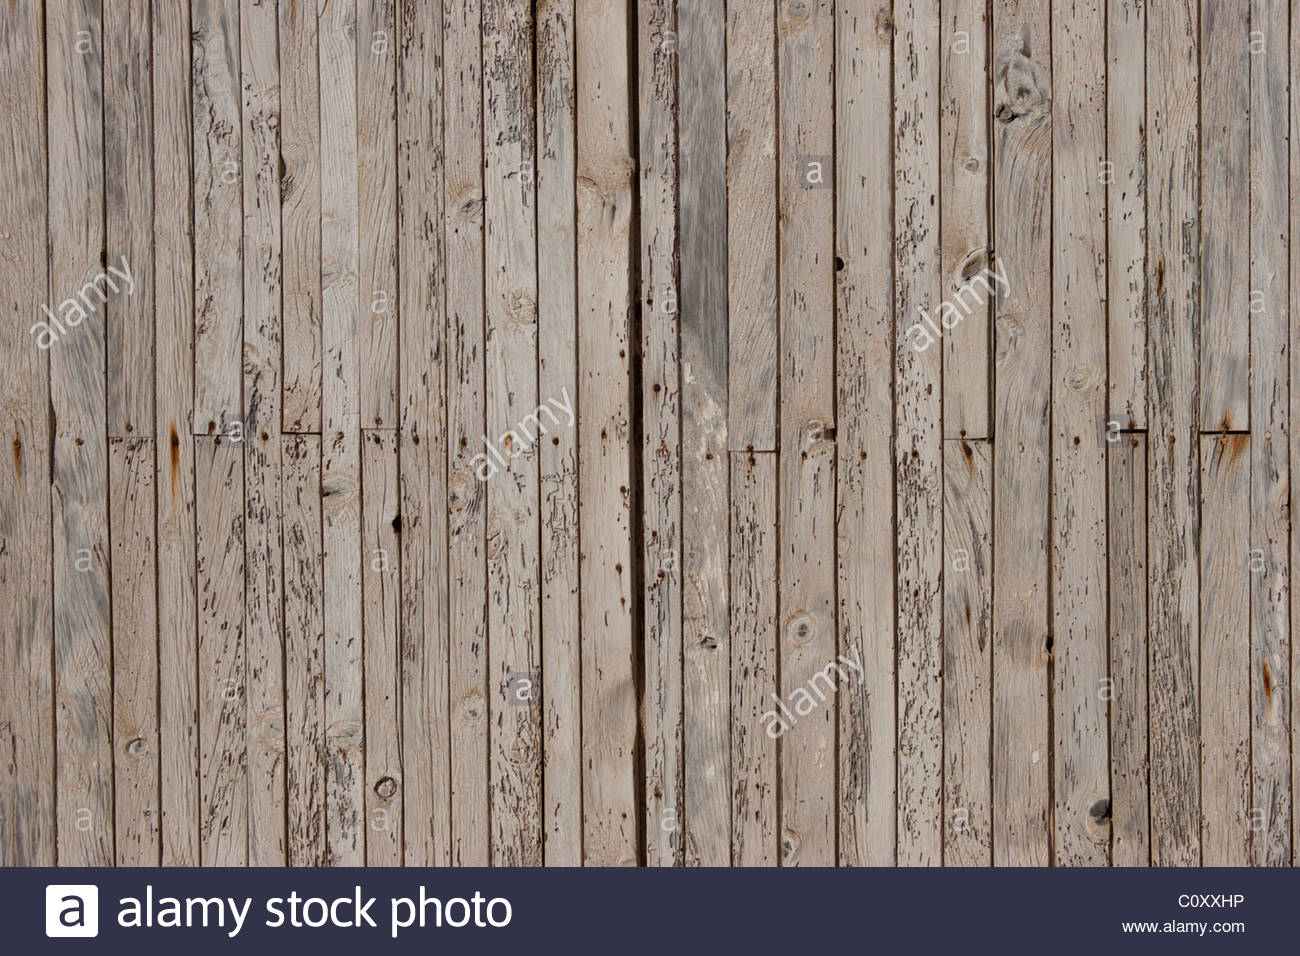 Barn Boards Whitewash Washed Out Wall Fence Wallpaper Background Stock